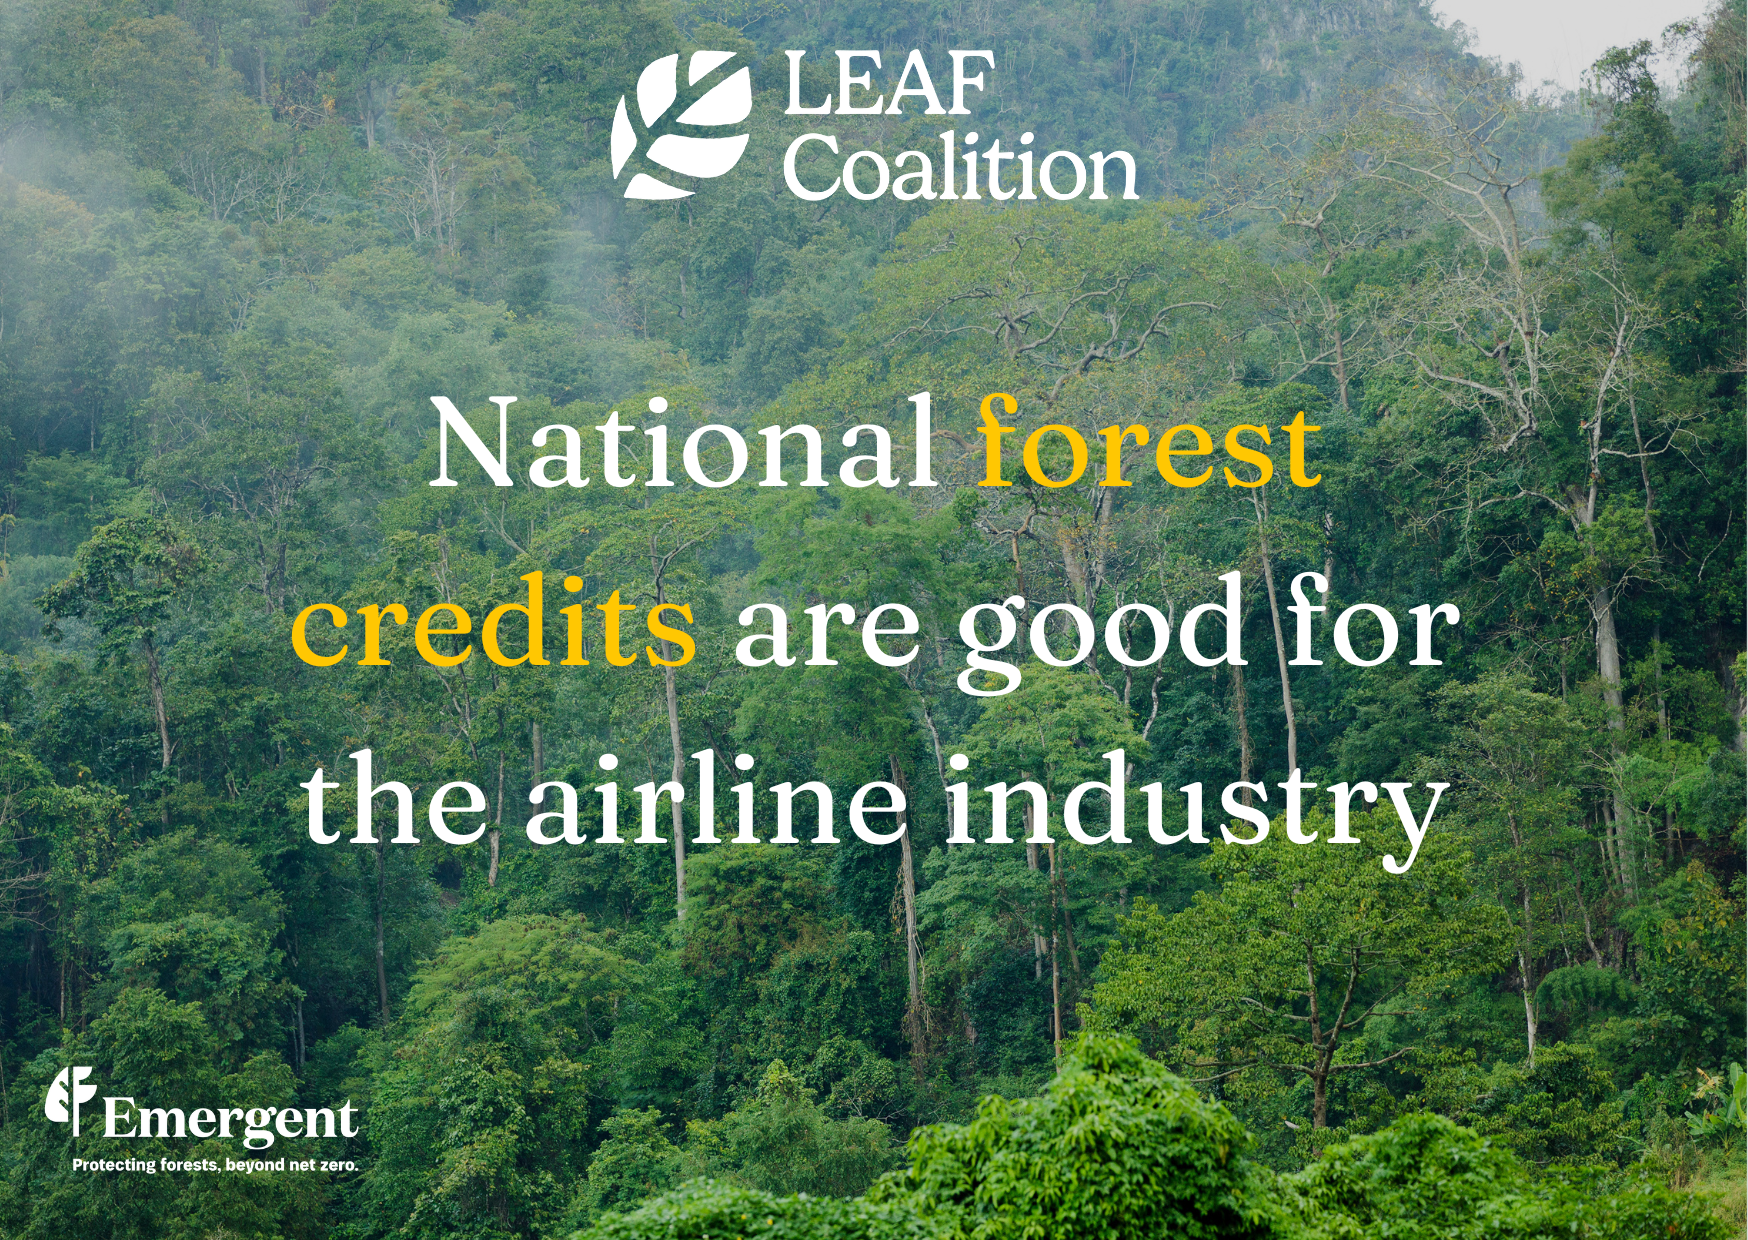 National forest credits are good for the airline industry